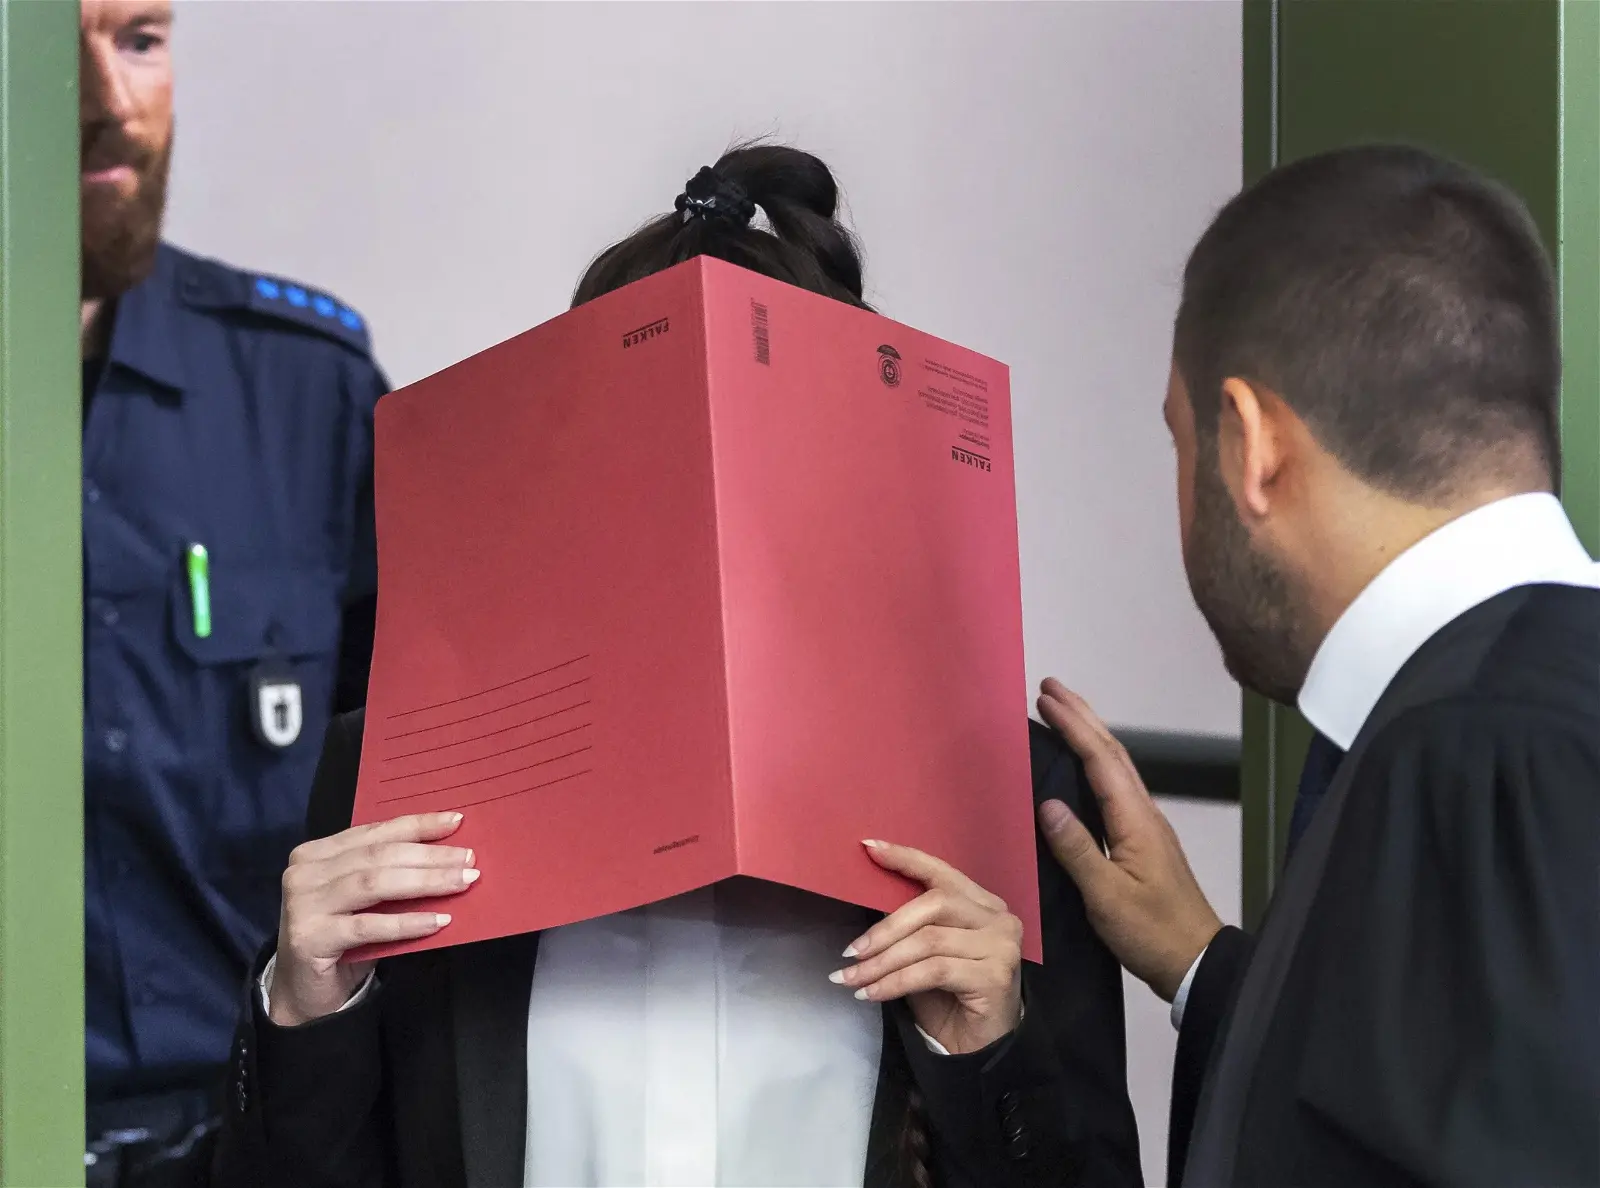 “German woman accused of crimes against humanity in Iraq to face retrial”